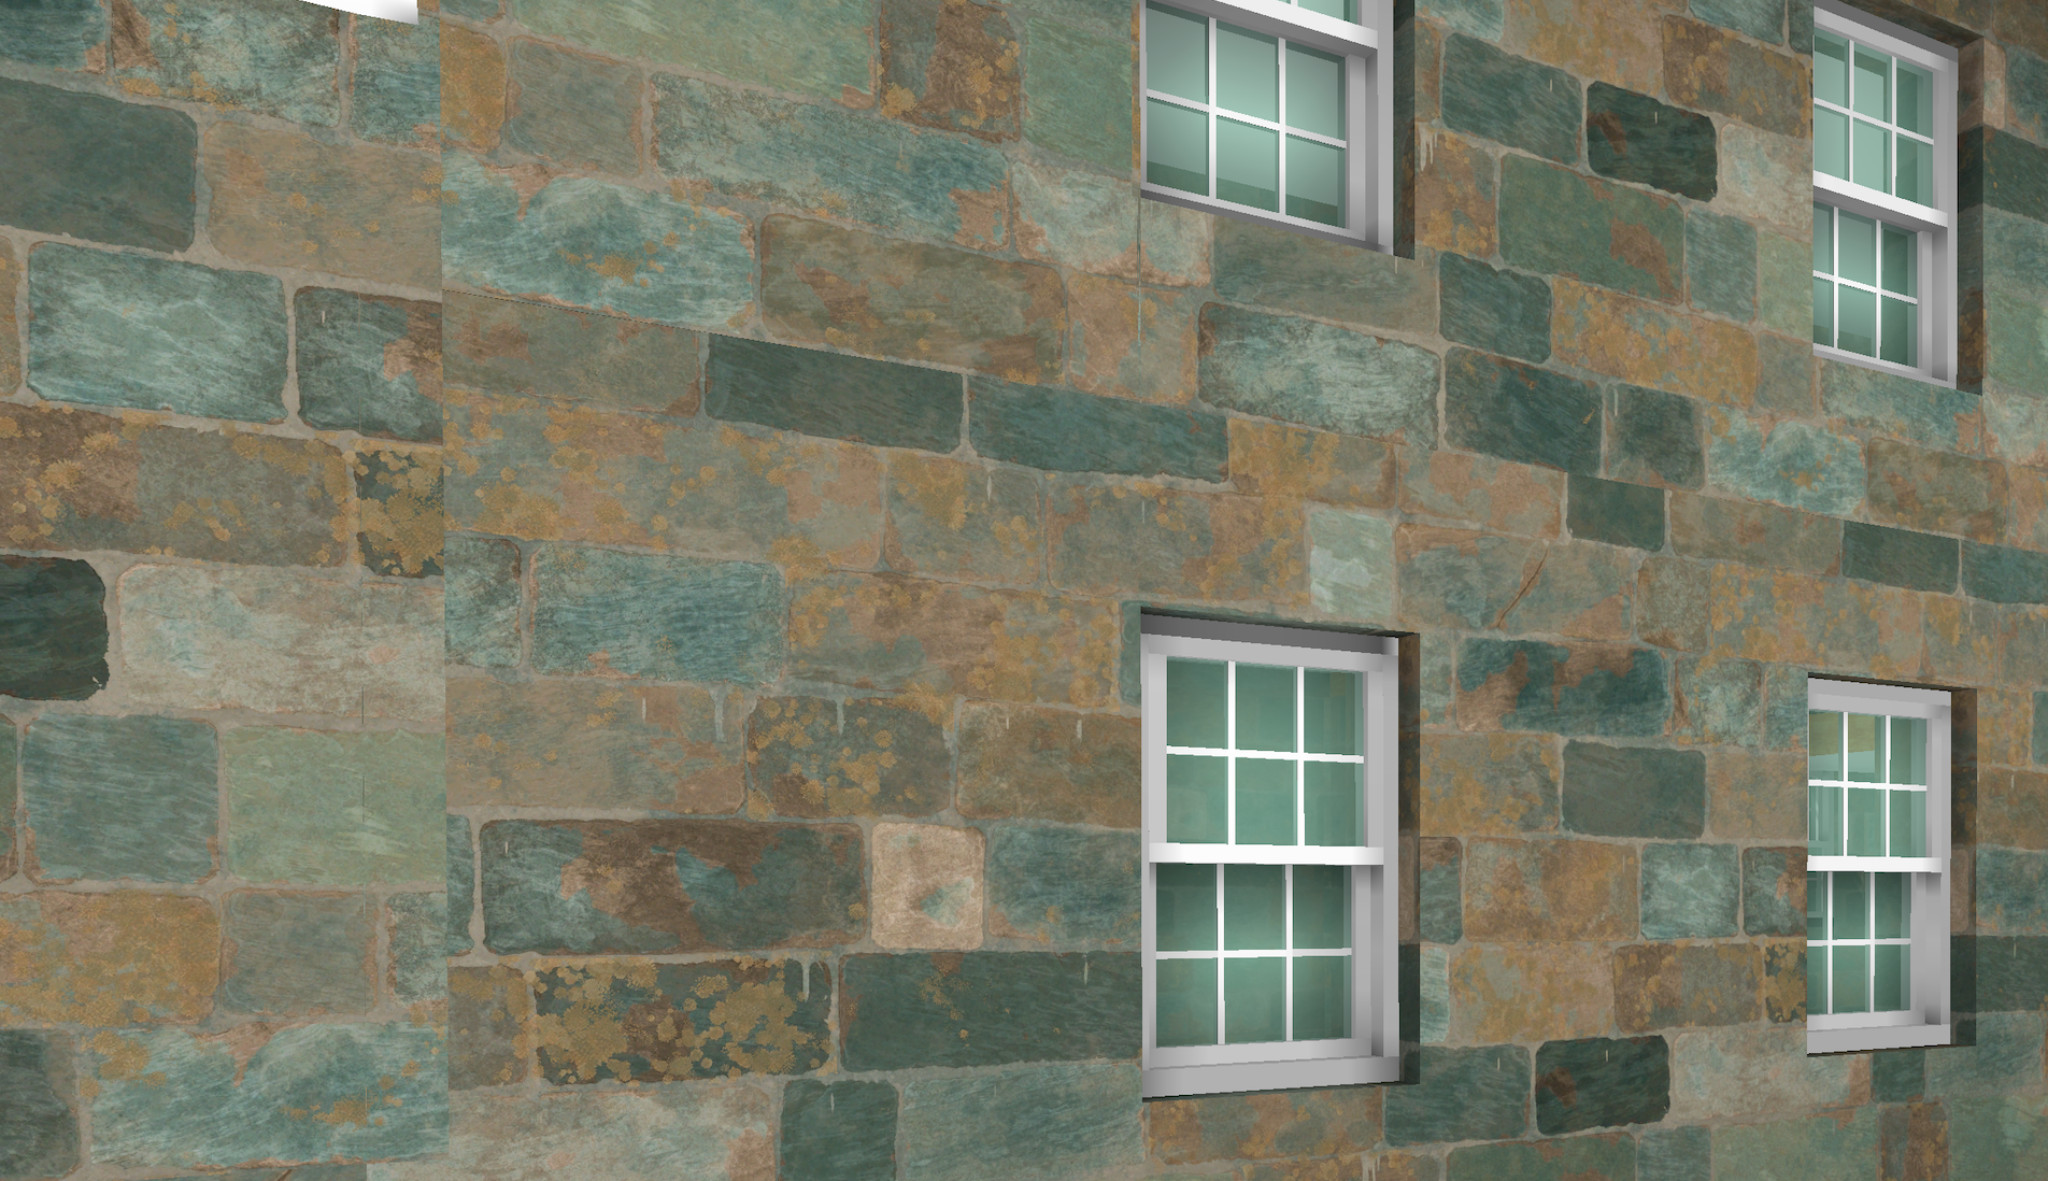 Newly developed JGA Guernsey granite material in 3D window and BIMx looks like this